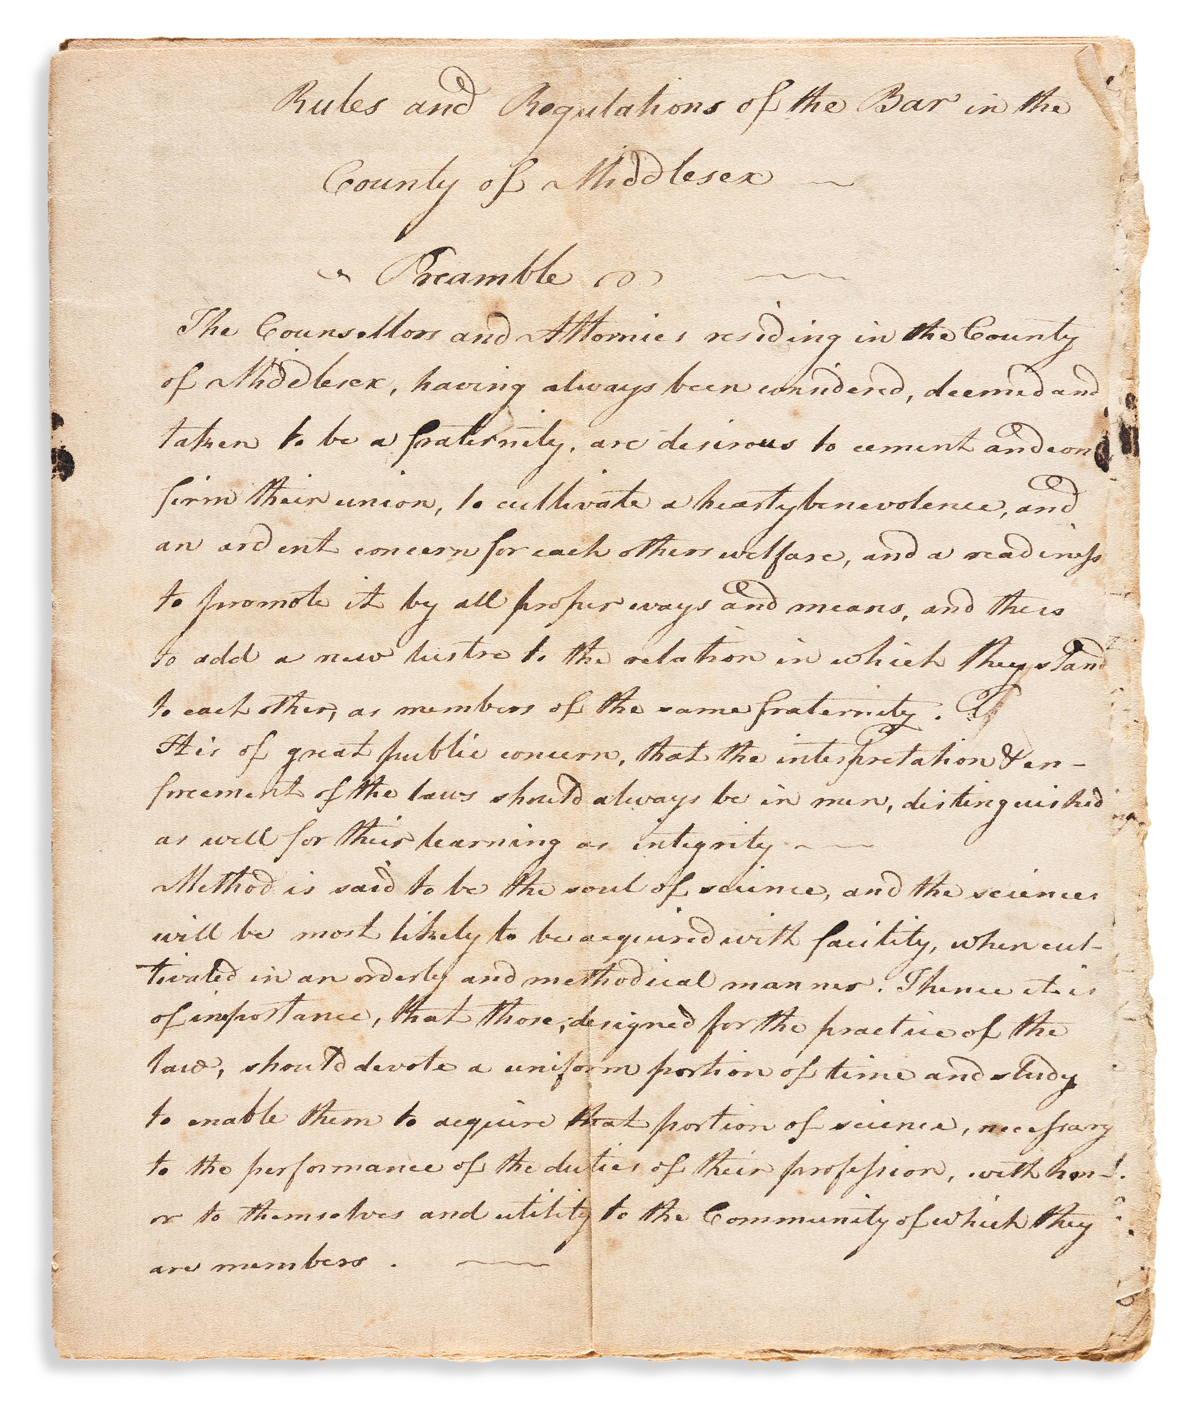 (LAW.) Manuscript rules, constitution, and founding minutes of the Gentlemen of the Bar in the County of Middlesex.